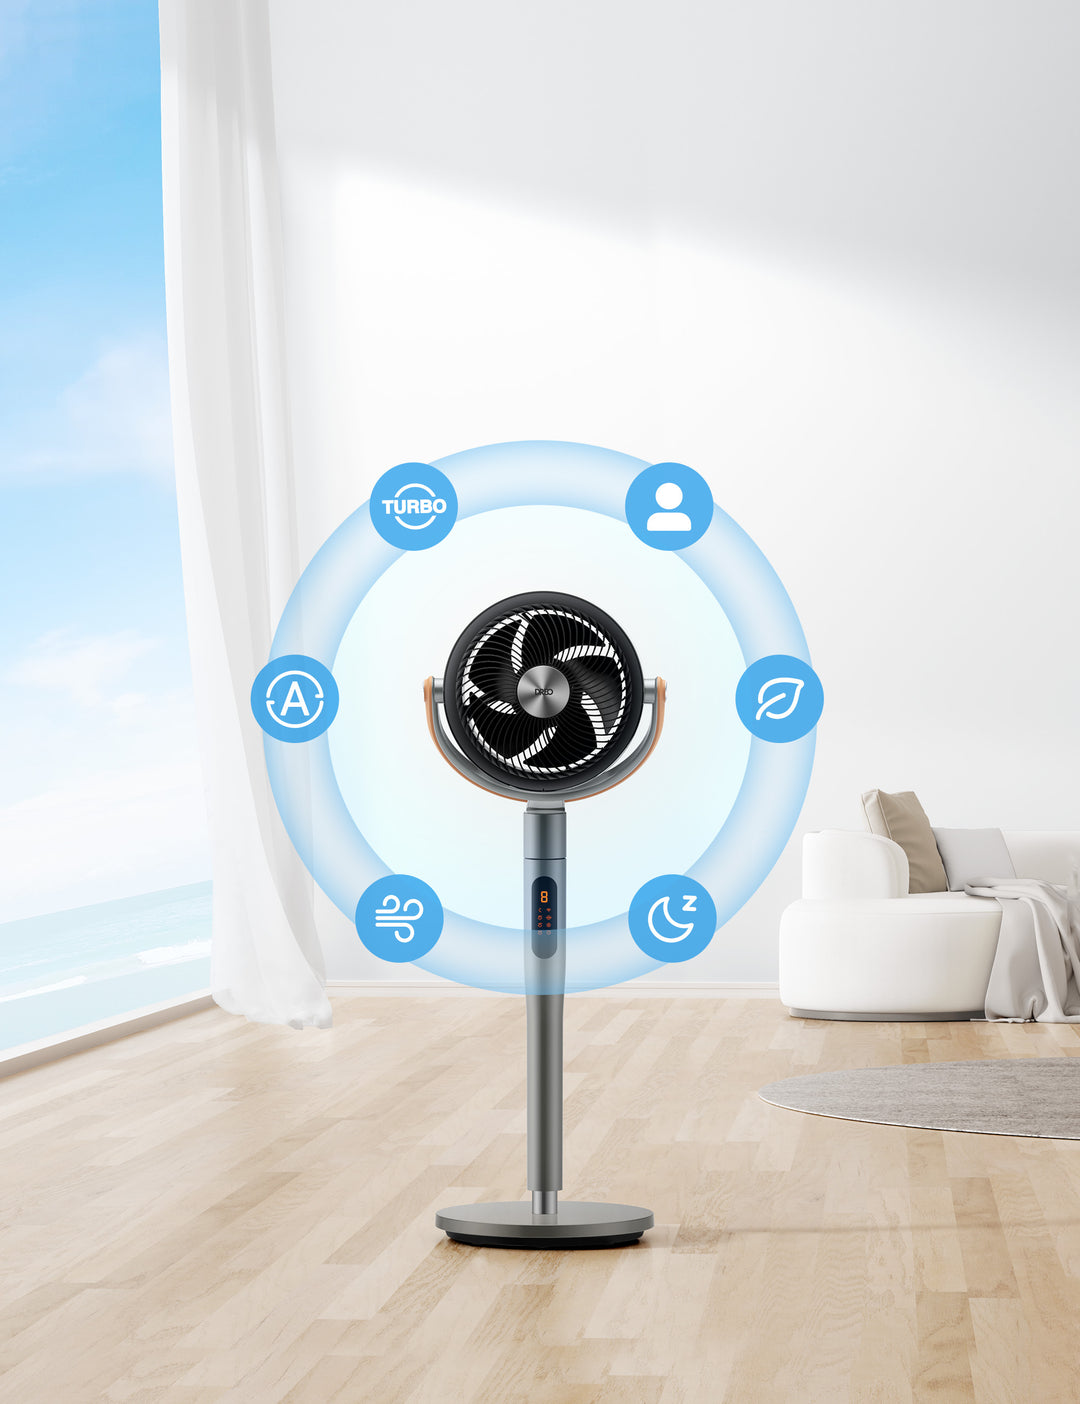 Dreo - Pedestal Fan with Remote, 120° + 105°Smart Oscillating Floor Fans with Wi-Fi/Voice Control, Works with Alexa/Google - Gray_2